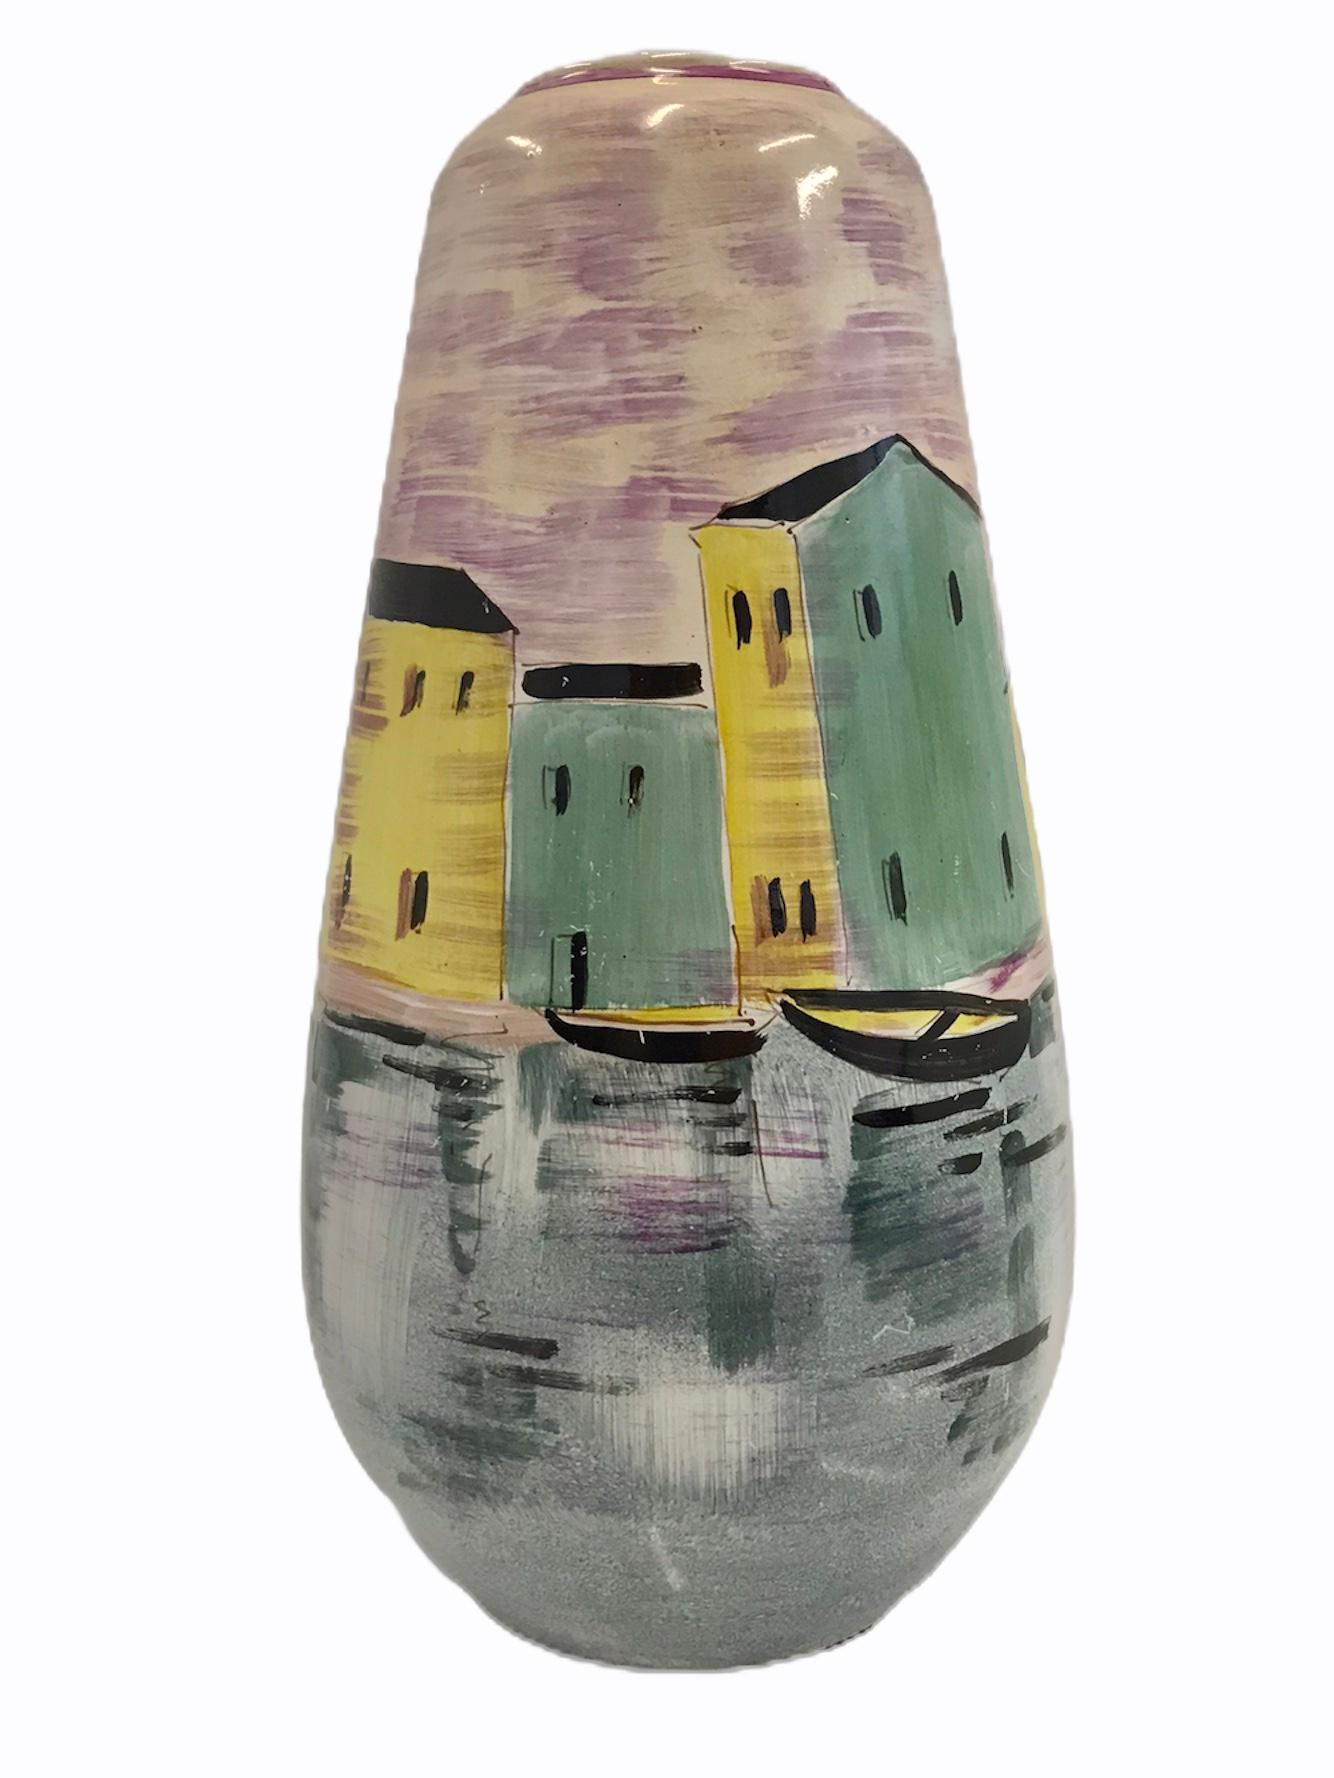 Midcentury Italian pottery vase depicting a nautical harbor scene. This lovely hand painted ceramic vessel with an image of an Italian at the edge of the water. Boats moored and a sail boat with its sail unfurled complement this beautiful serene and